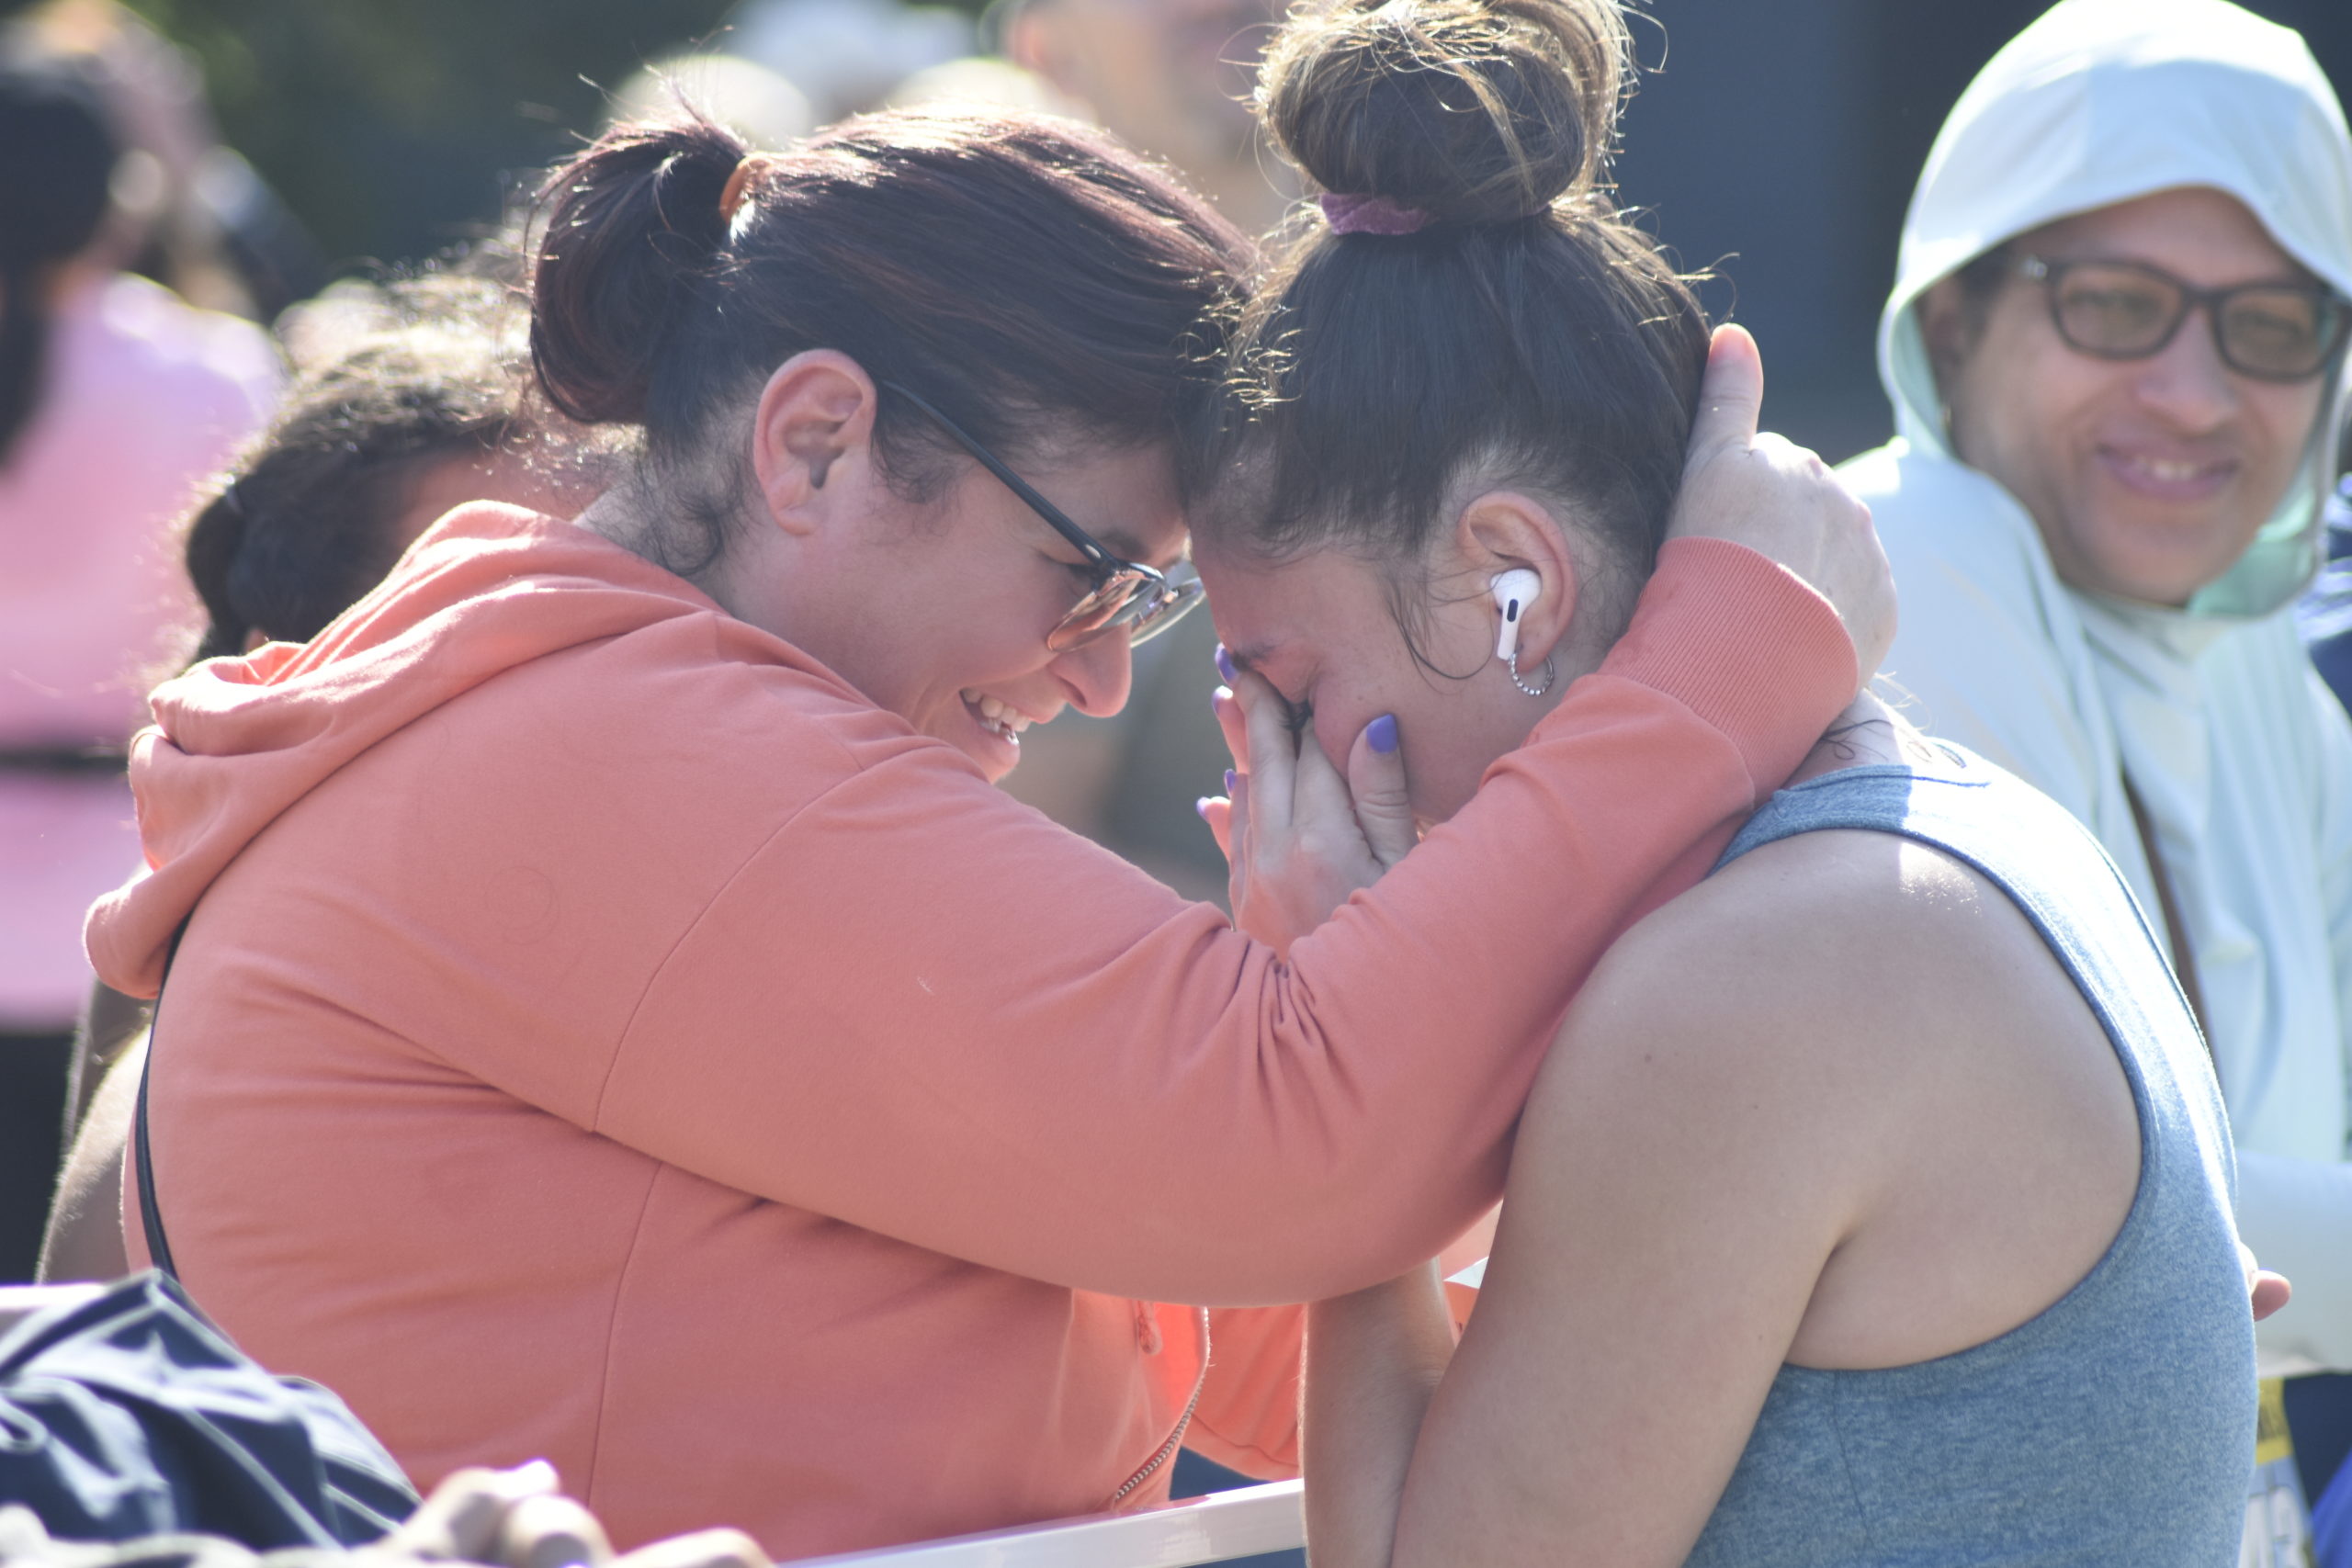 Marissa Mignano of Flushing, Queens, shares a moment with a family member after finishing the half marathon.